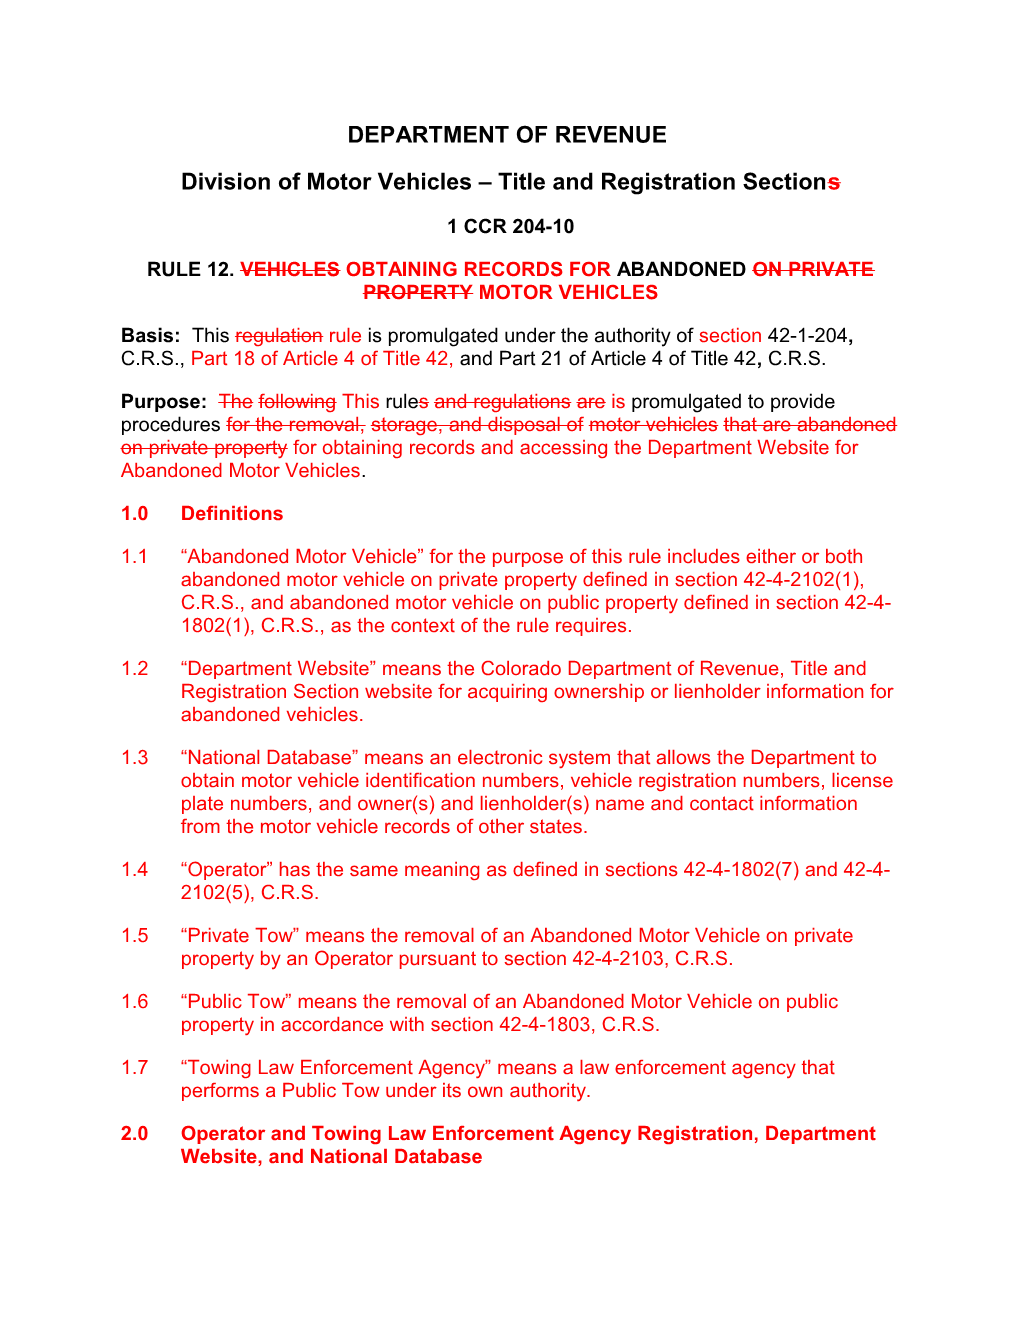 Division of Motor Vehicles Title and Registration Sections s2